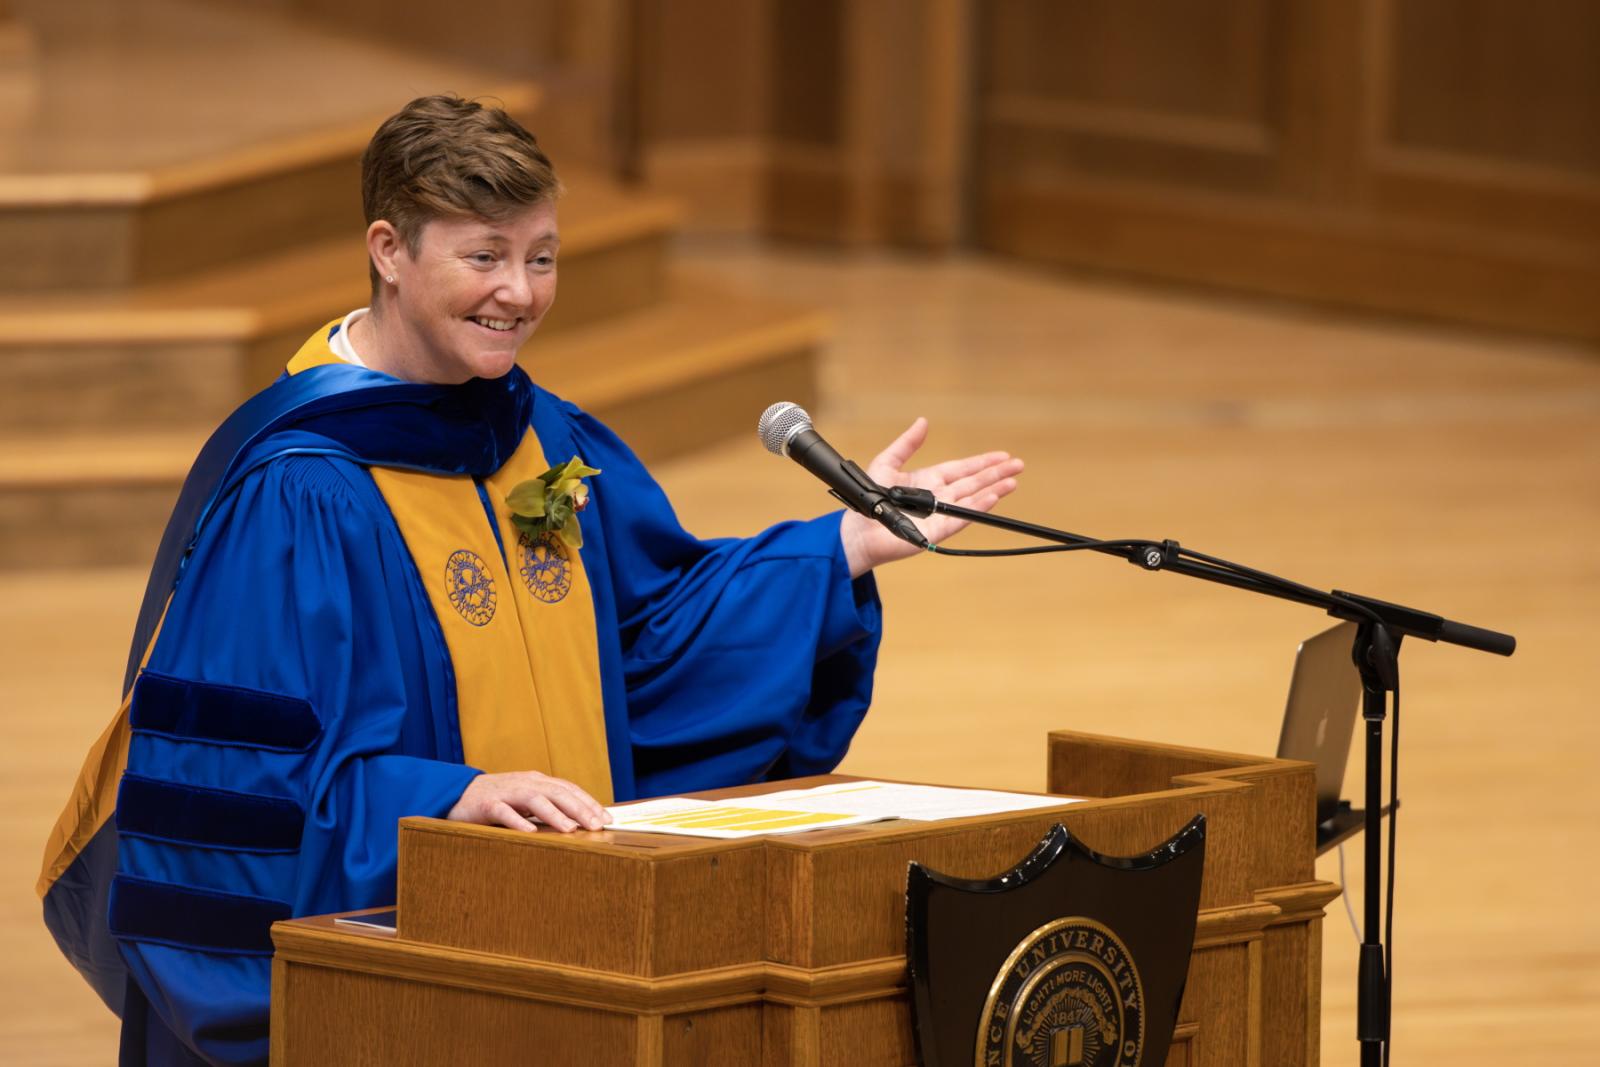 Constance Kassor speaks in Memorial Chapel on Buddhist pilgrimages during Honors Convocation at the close of Spring Term. (Photo by Danny Damiani)